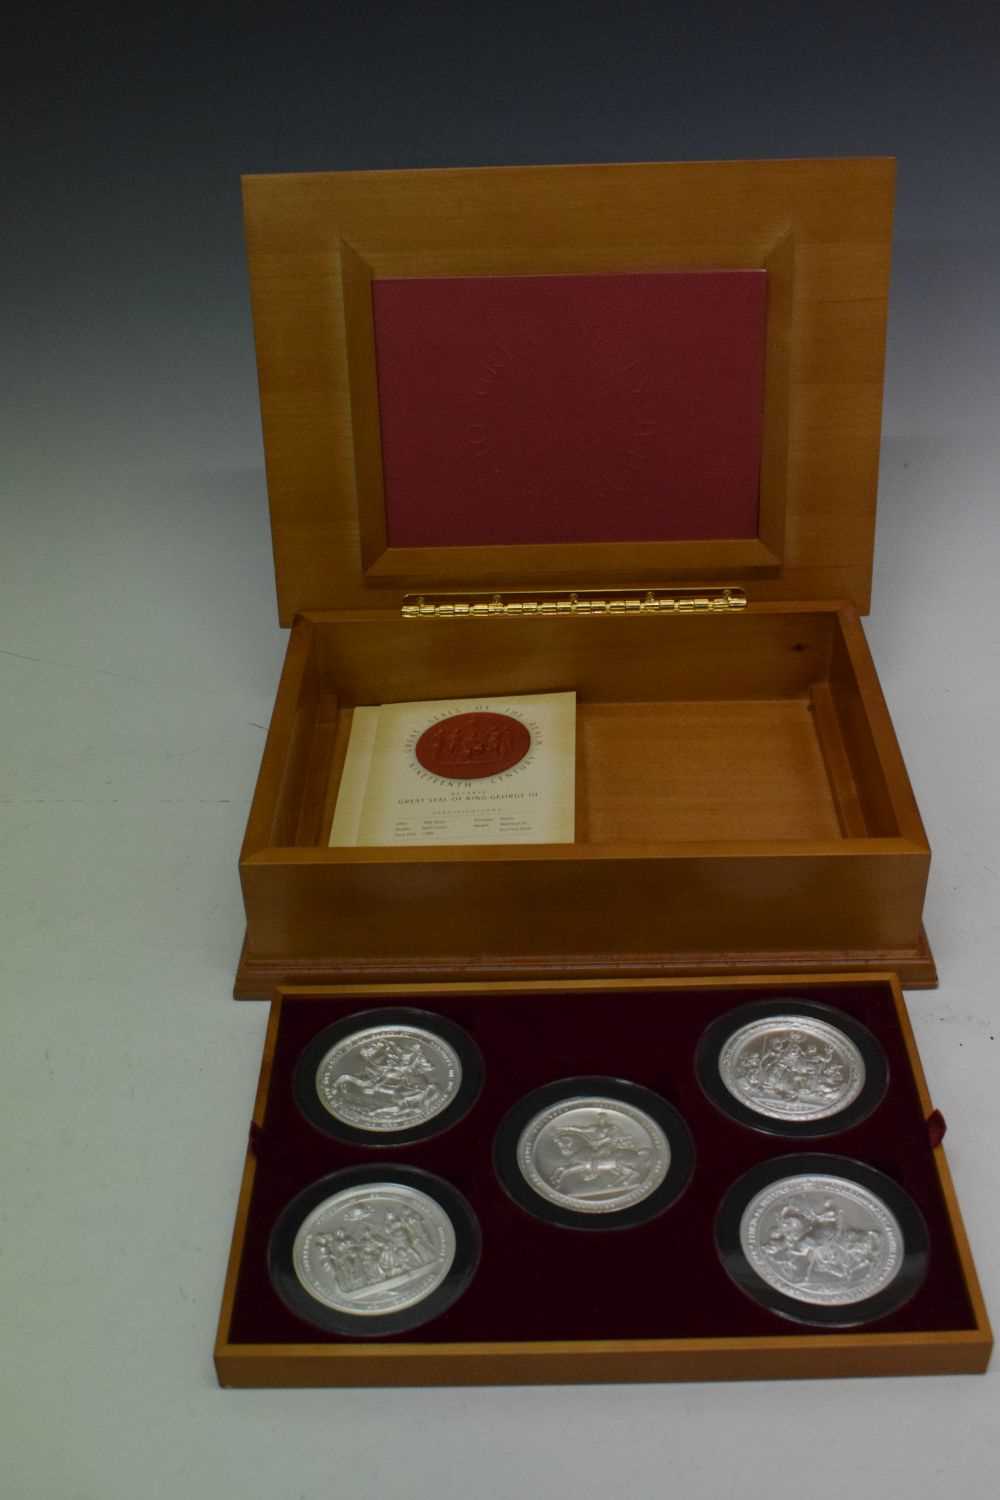 Royal Mint - Great Seals of the Realm 'Nineteenth Century' silver five medallion set - Image 6 of 12